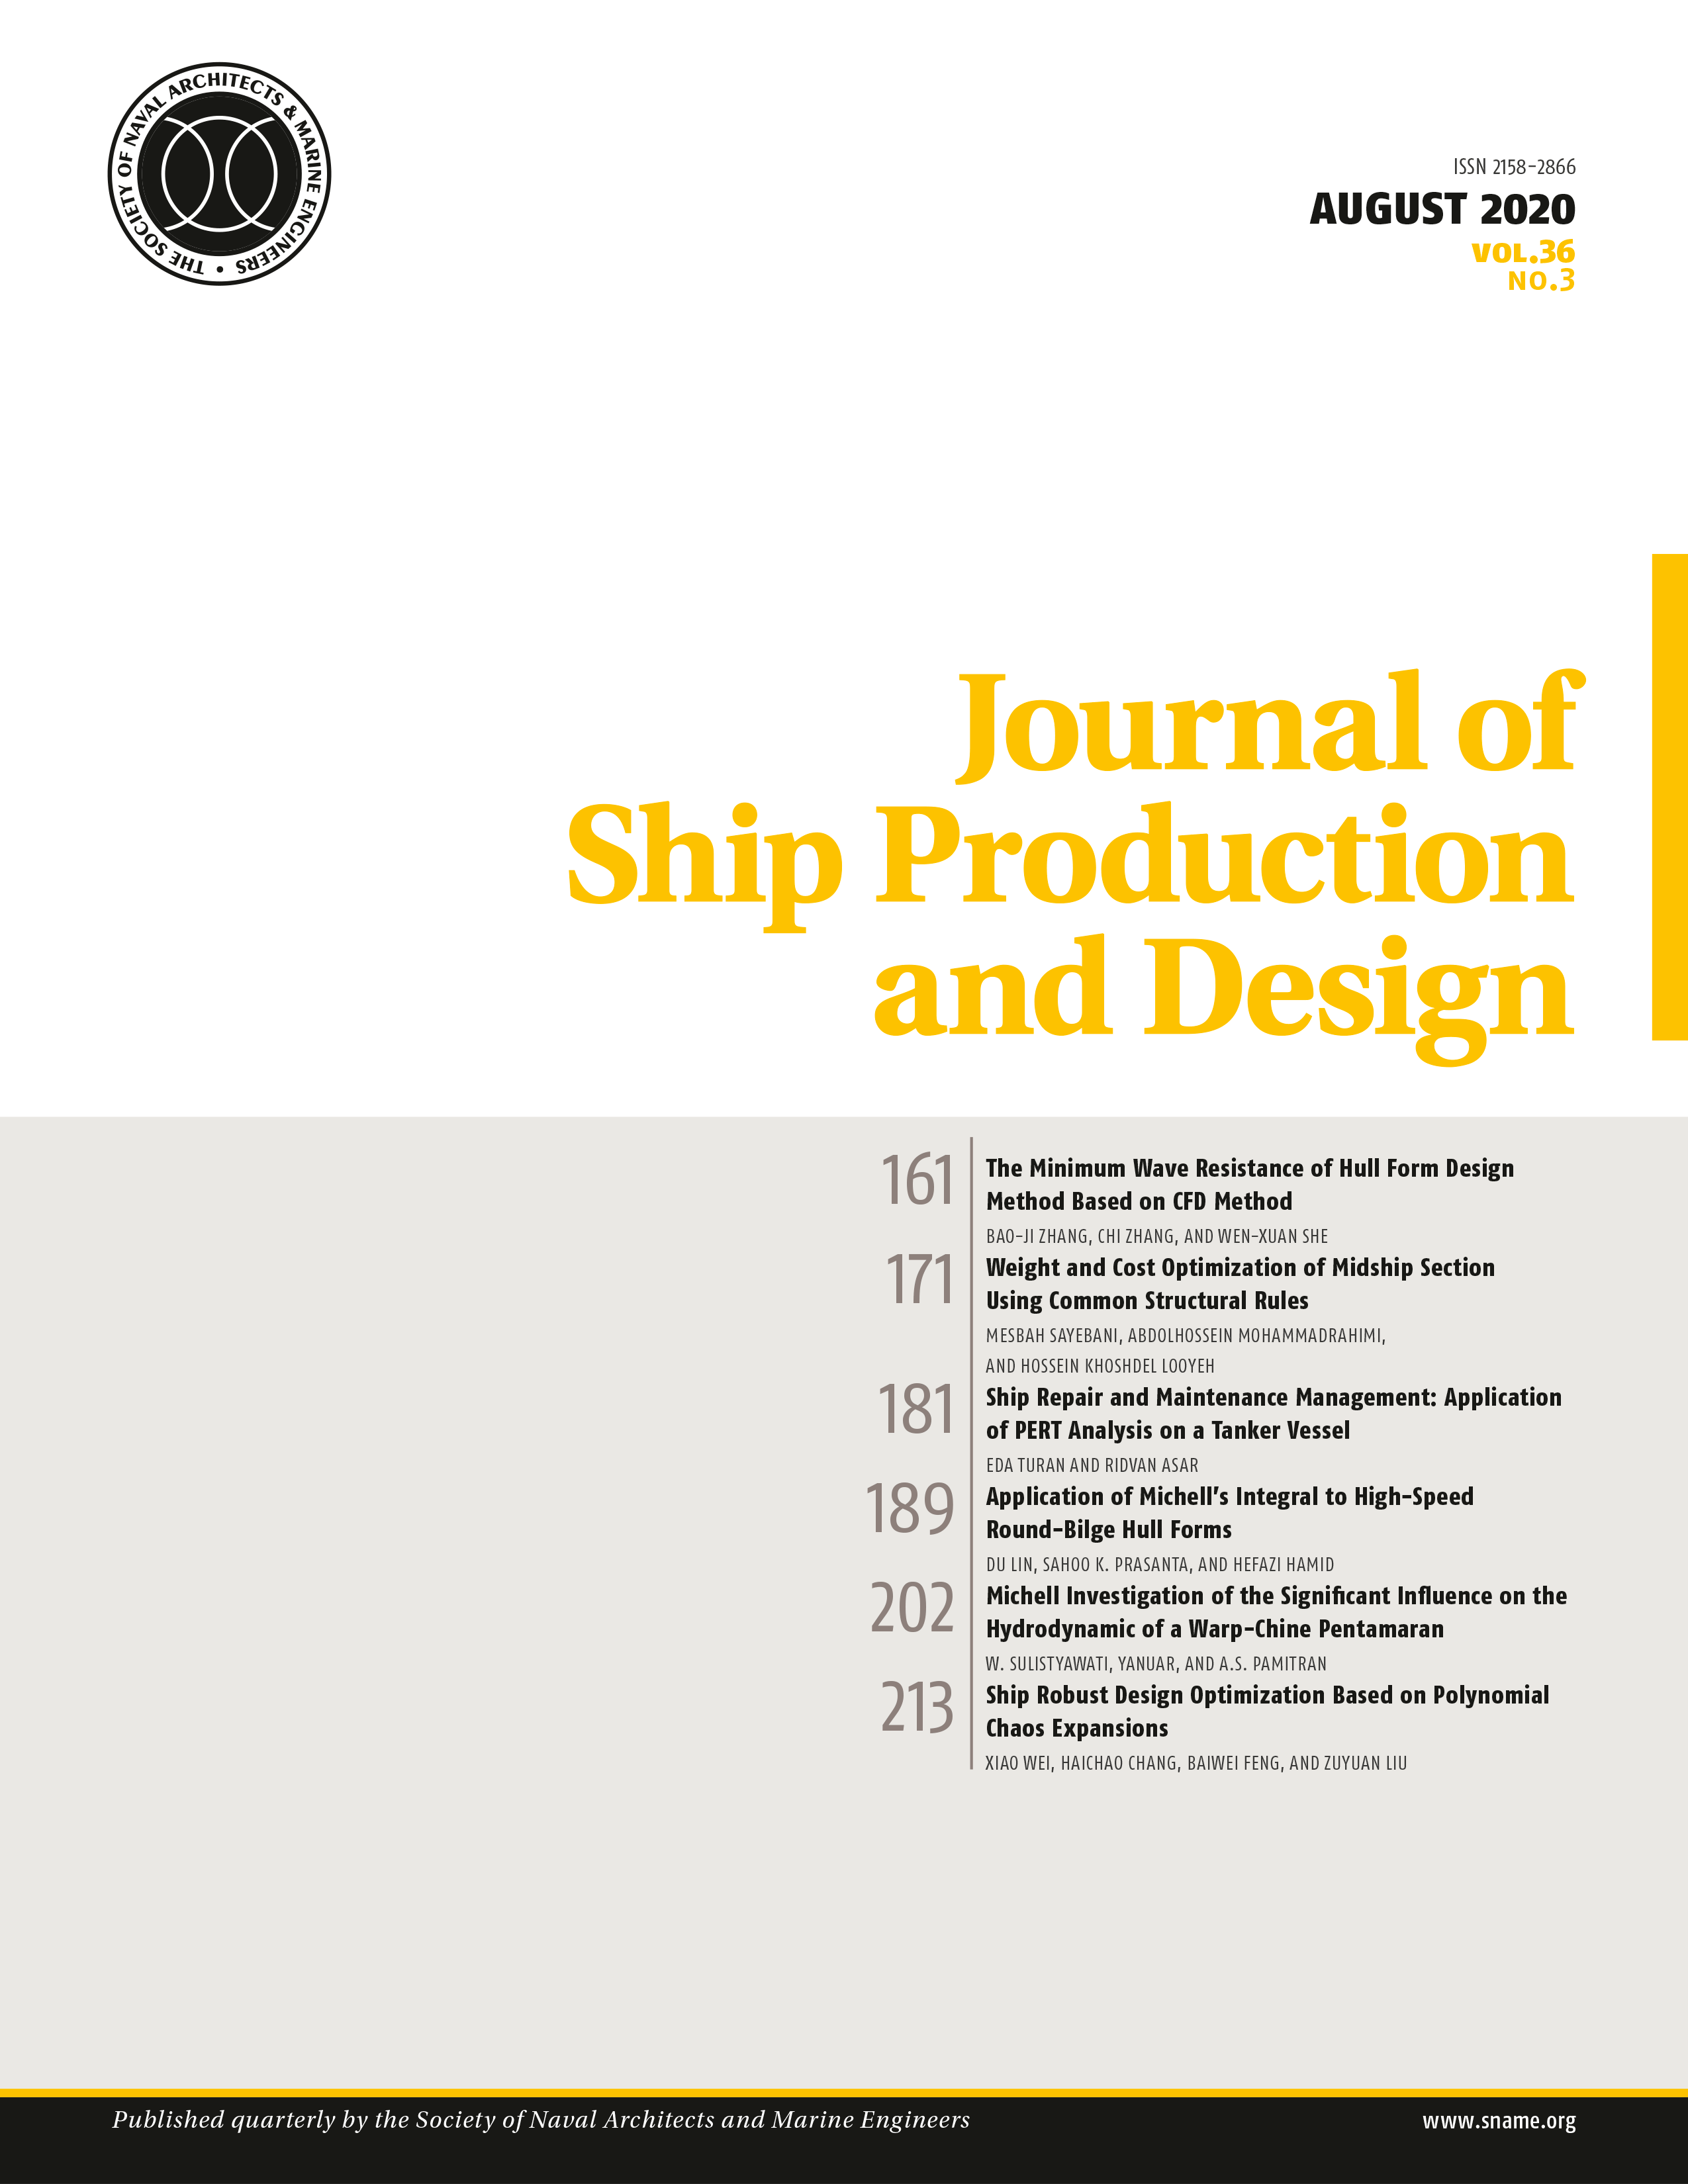 Journal of Ship Production and Design 2018